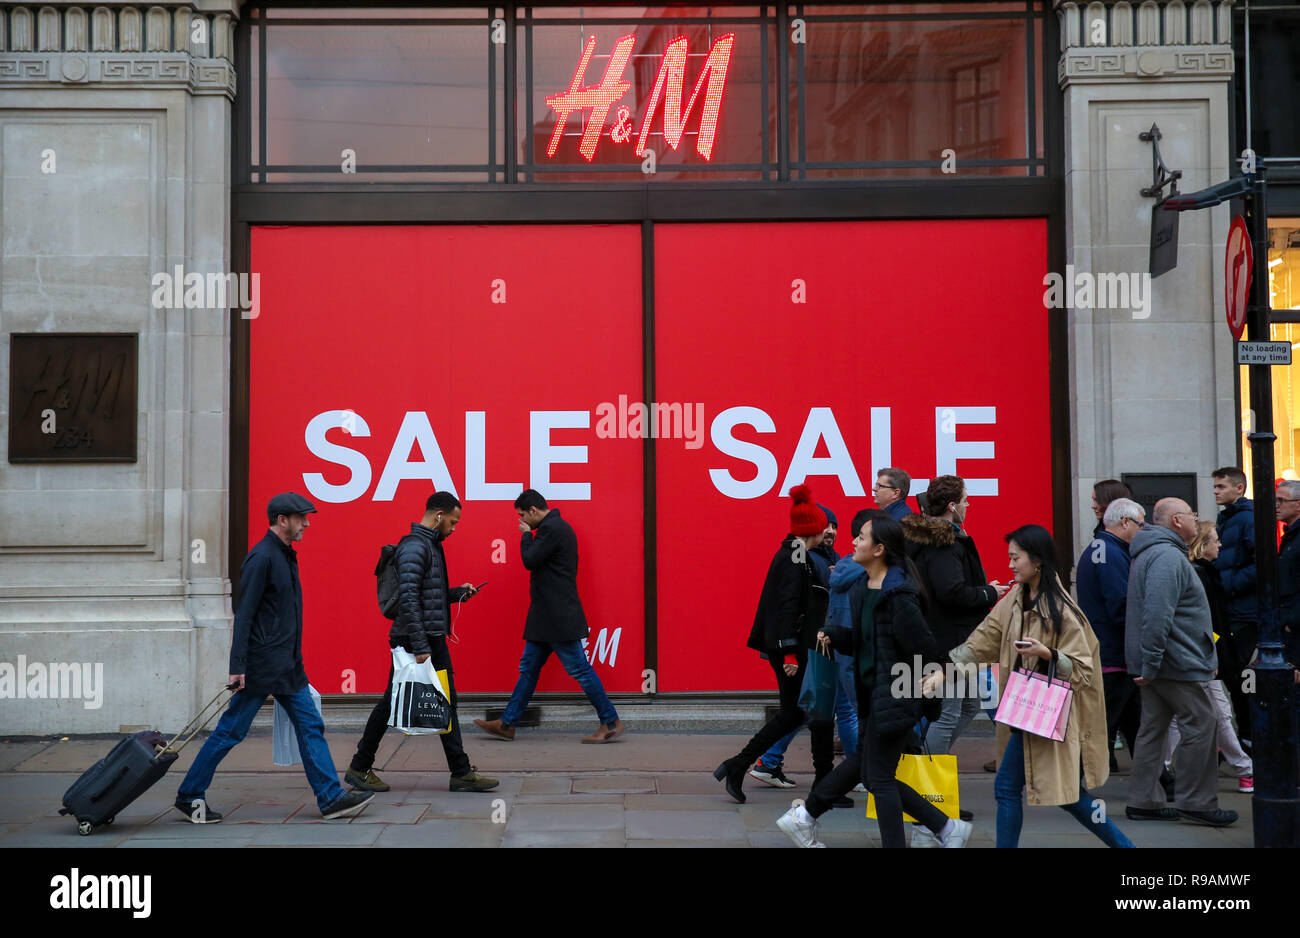 Regent Street, London, UK. Shoppers are seen walking past a large SALE sign  in H&M window display on London Regent Street as the winter sales begin.  Credit: SOPA Images Limited/Alamy Live News